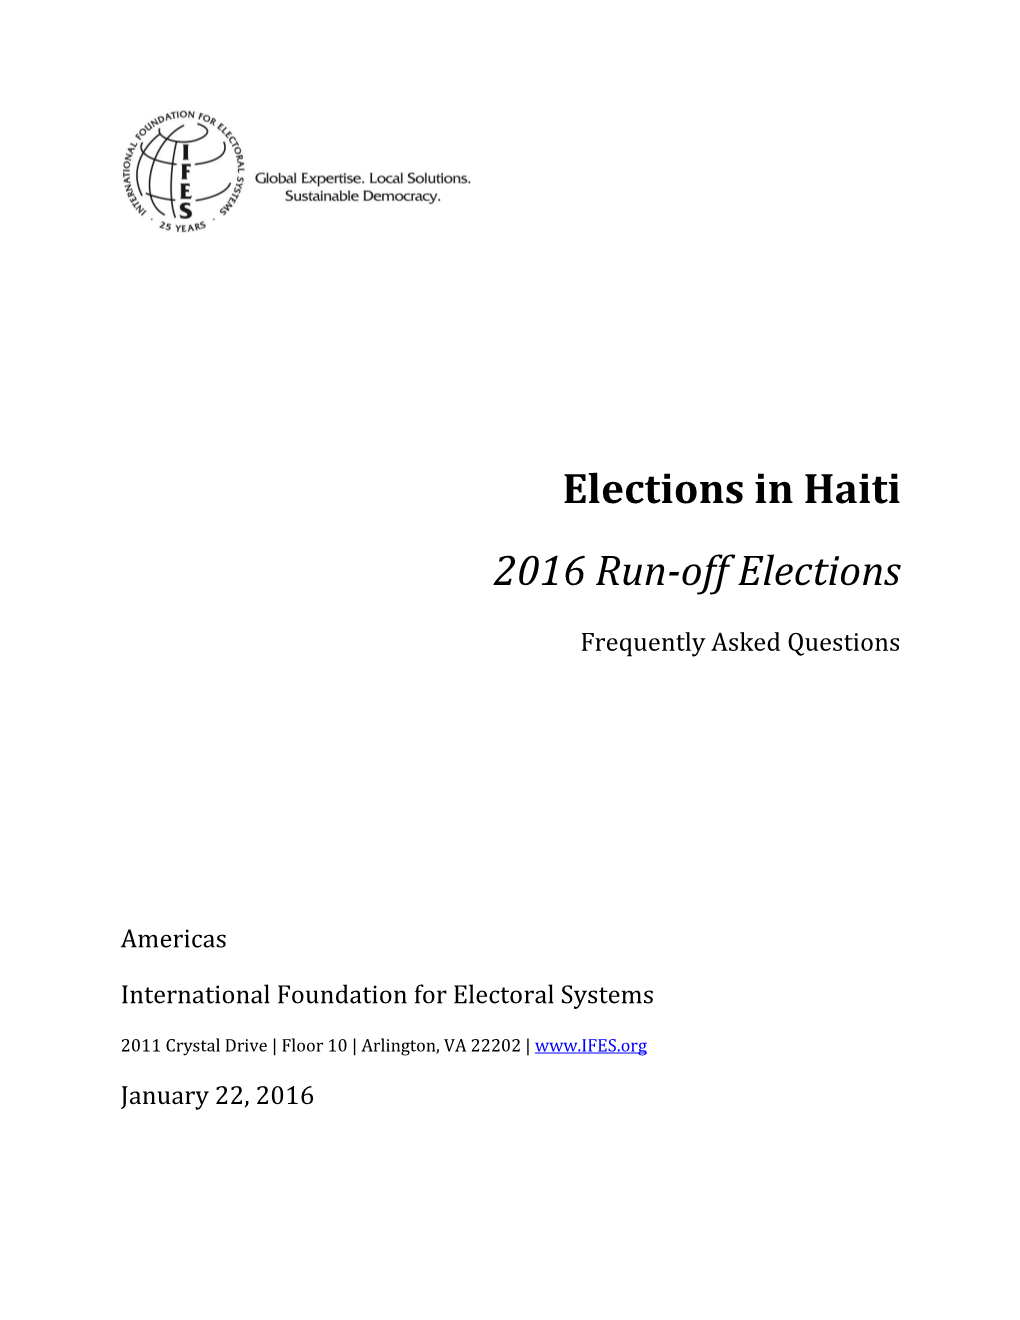 Elections in Haiti 2016 Run-Off Elections